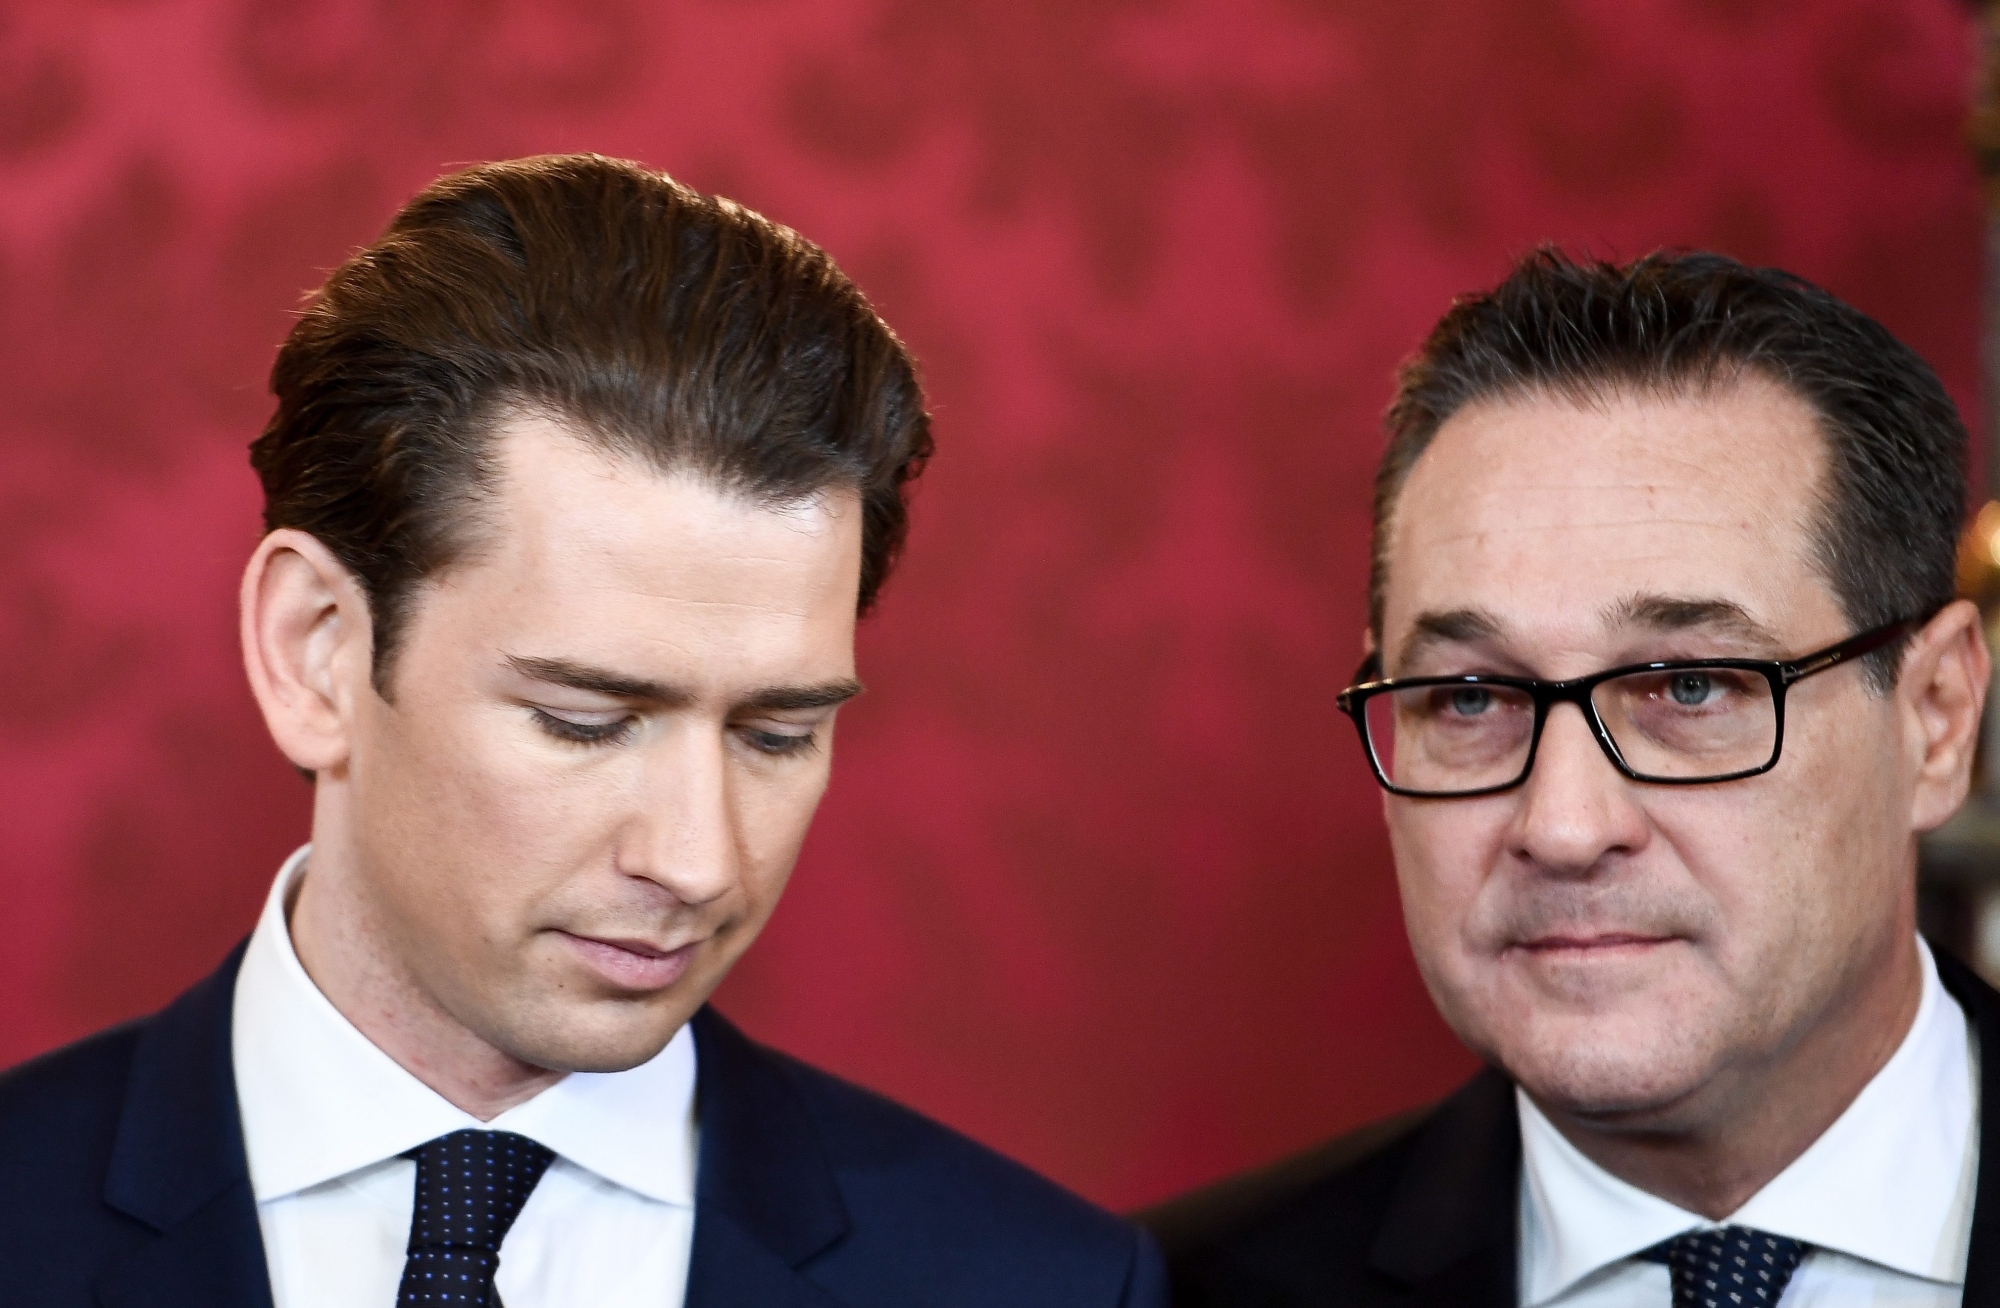 epa07580056 (FILE) - Austrian Chancellor Sebastian Kurz (L) and Vice-Chancellor Heinz-Christian Strache (R) at the presidential office of the Hofburg Palace in Vienna, Austria, 18 December 2017 (reissued 18 May 2019). According to reports, Kurz will meet Strache on 18 May 2019 and is expected to end cooperation as media caught Strache in a corruption scandal. German merdia have on 17 May 2019 published a secretly recorded video of Strache in Ibiza in July 2017, where Heinz-Christian Strache is claimed to meet an alleged niece of a unknown Russian oligarch who wanted to invest large sums of money in Austria.  EPA/CHRISTIAN BRUNA (FILE) AUSTRIA GOVERNMENT CORRUPTION CRISIS